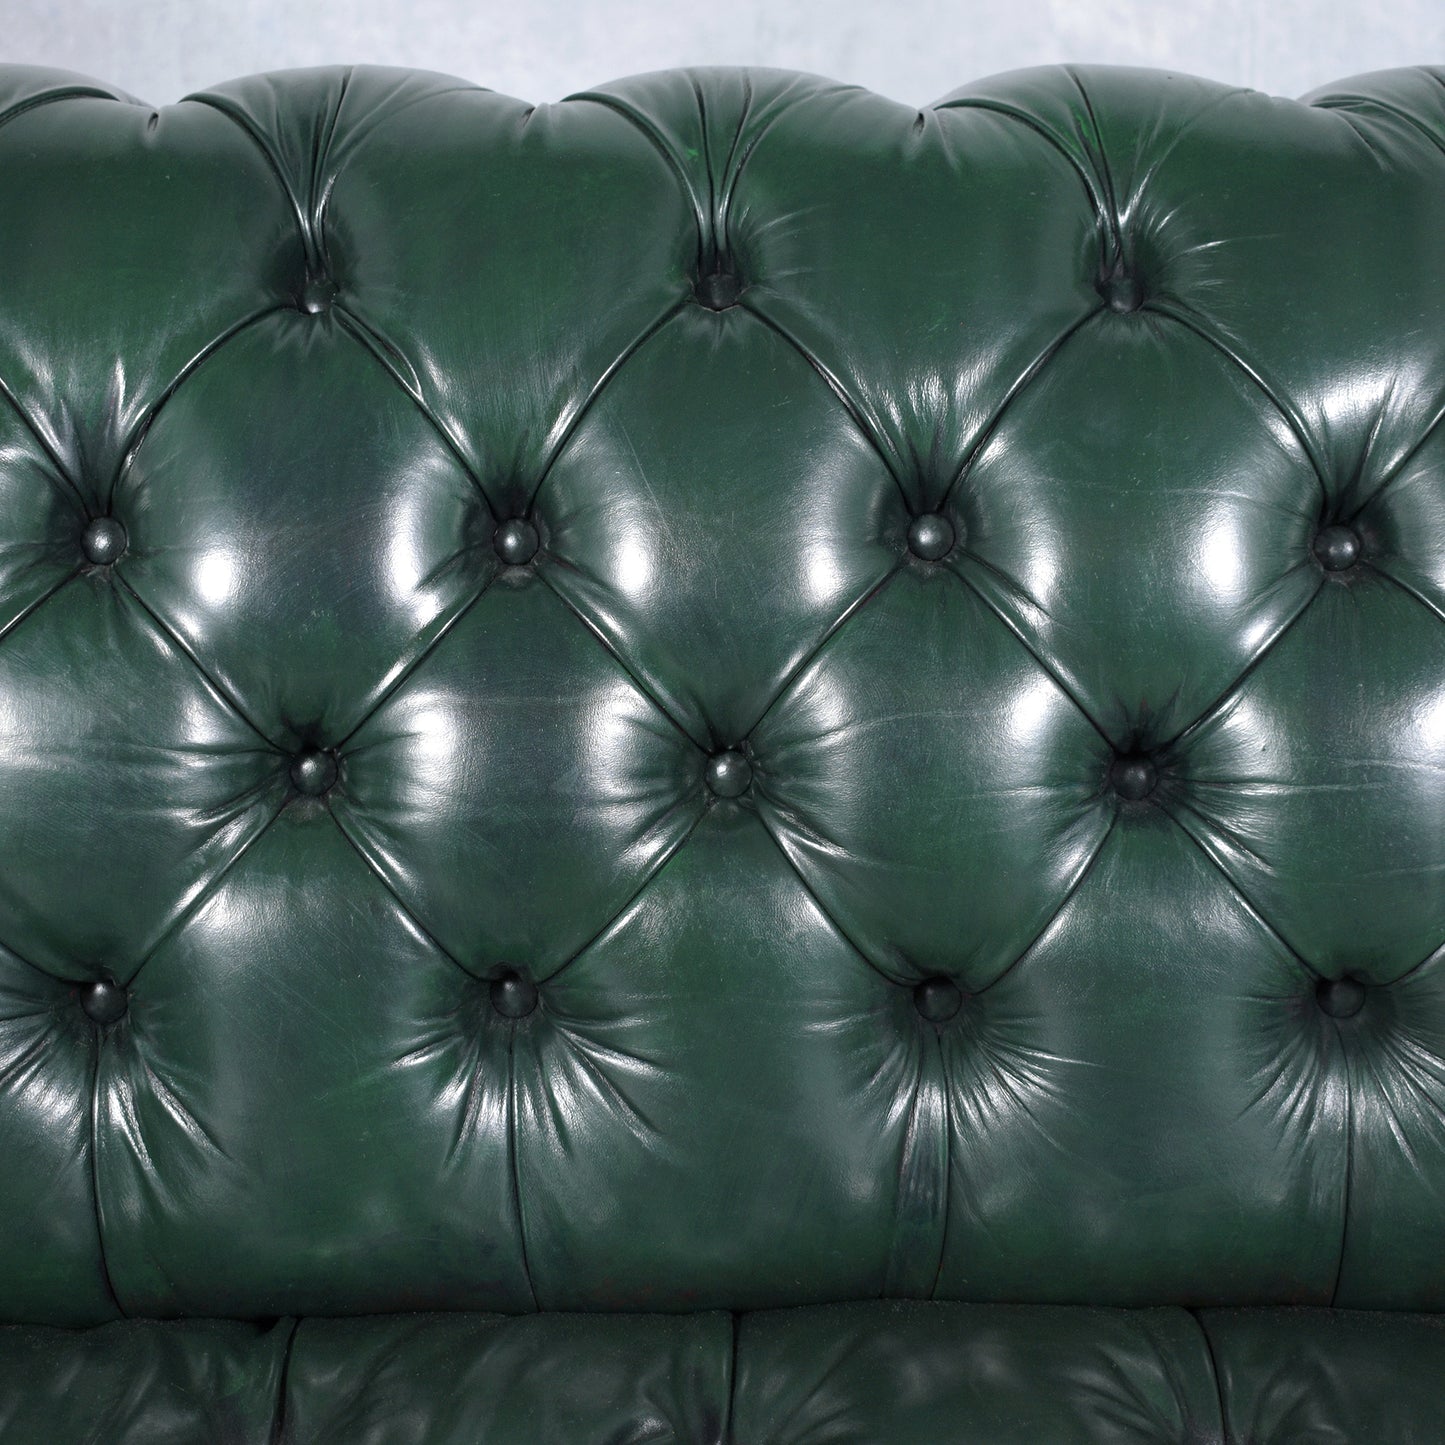 1970s Vintage Chesterfield Sofa: Emerald Green Leather with Elegant Carved Legs